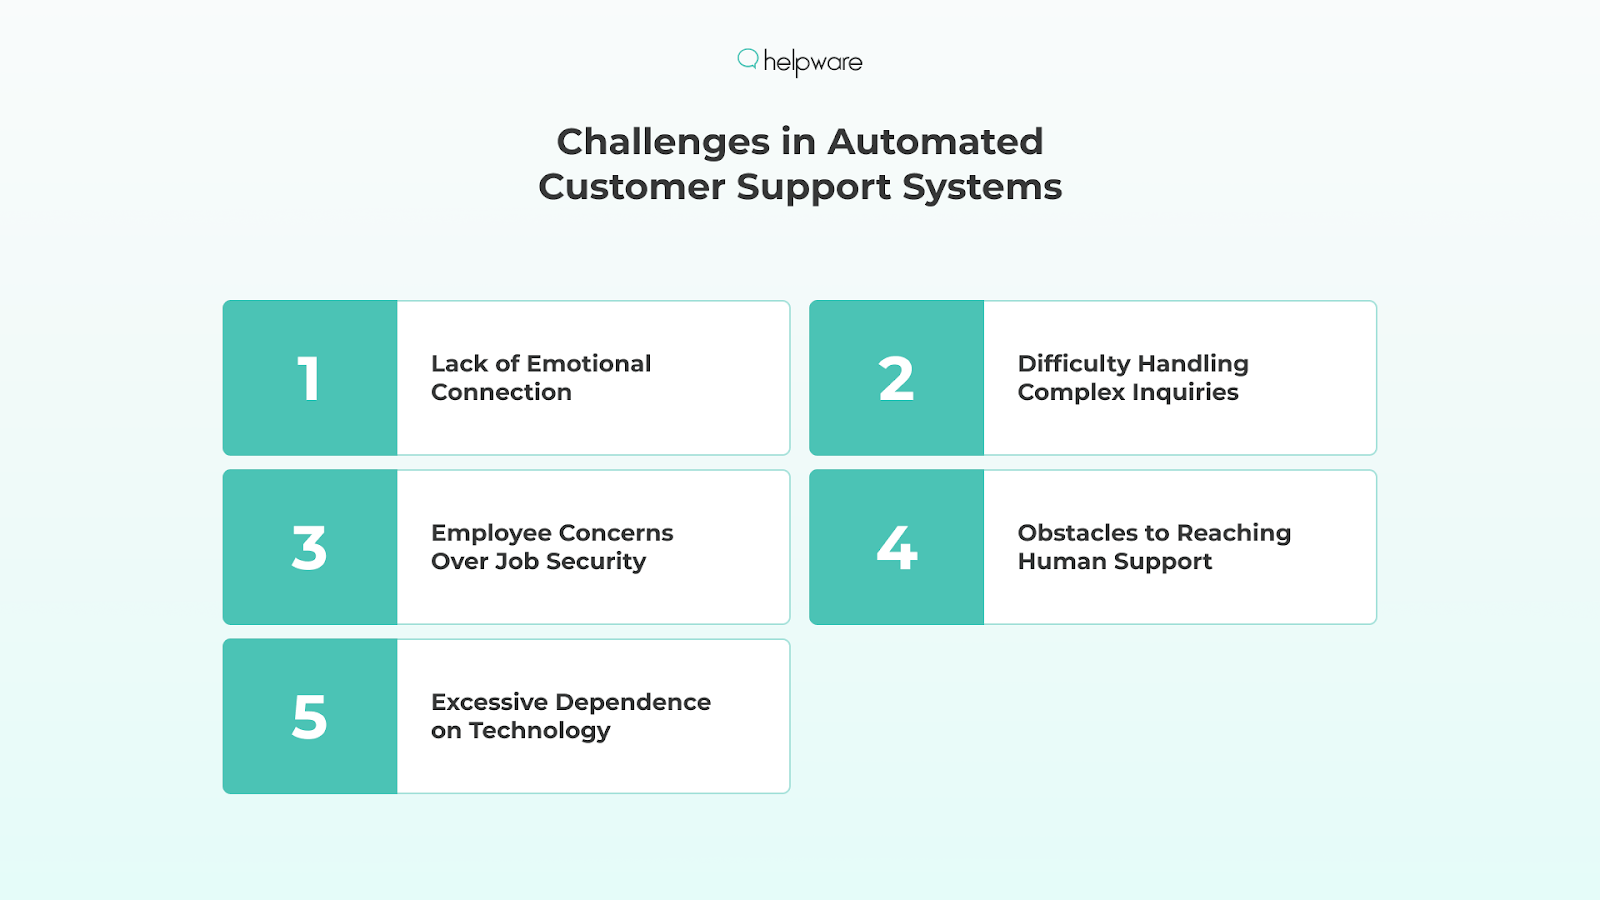 Challenges in Automated Customer Support Systems